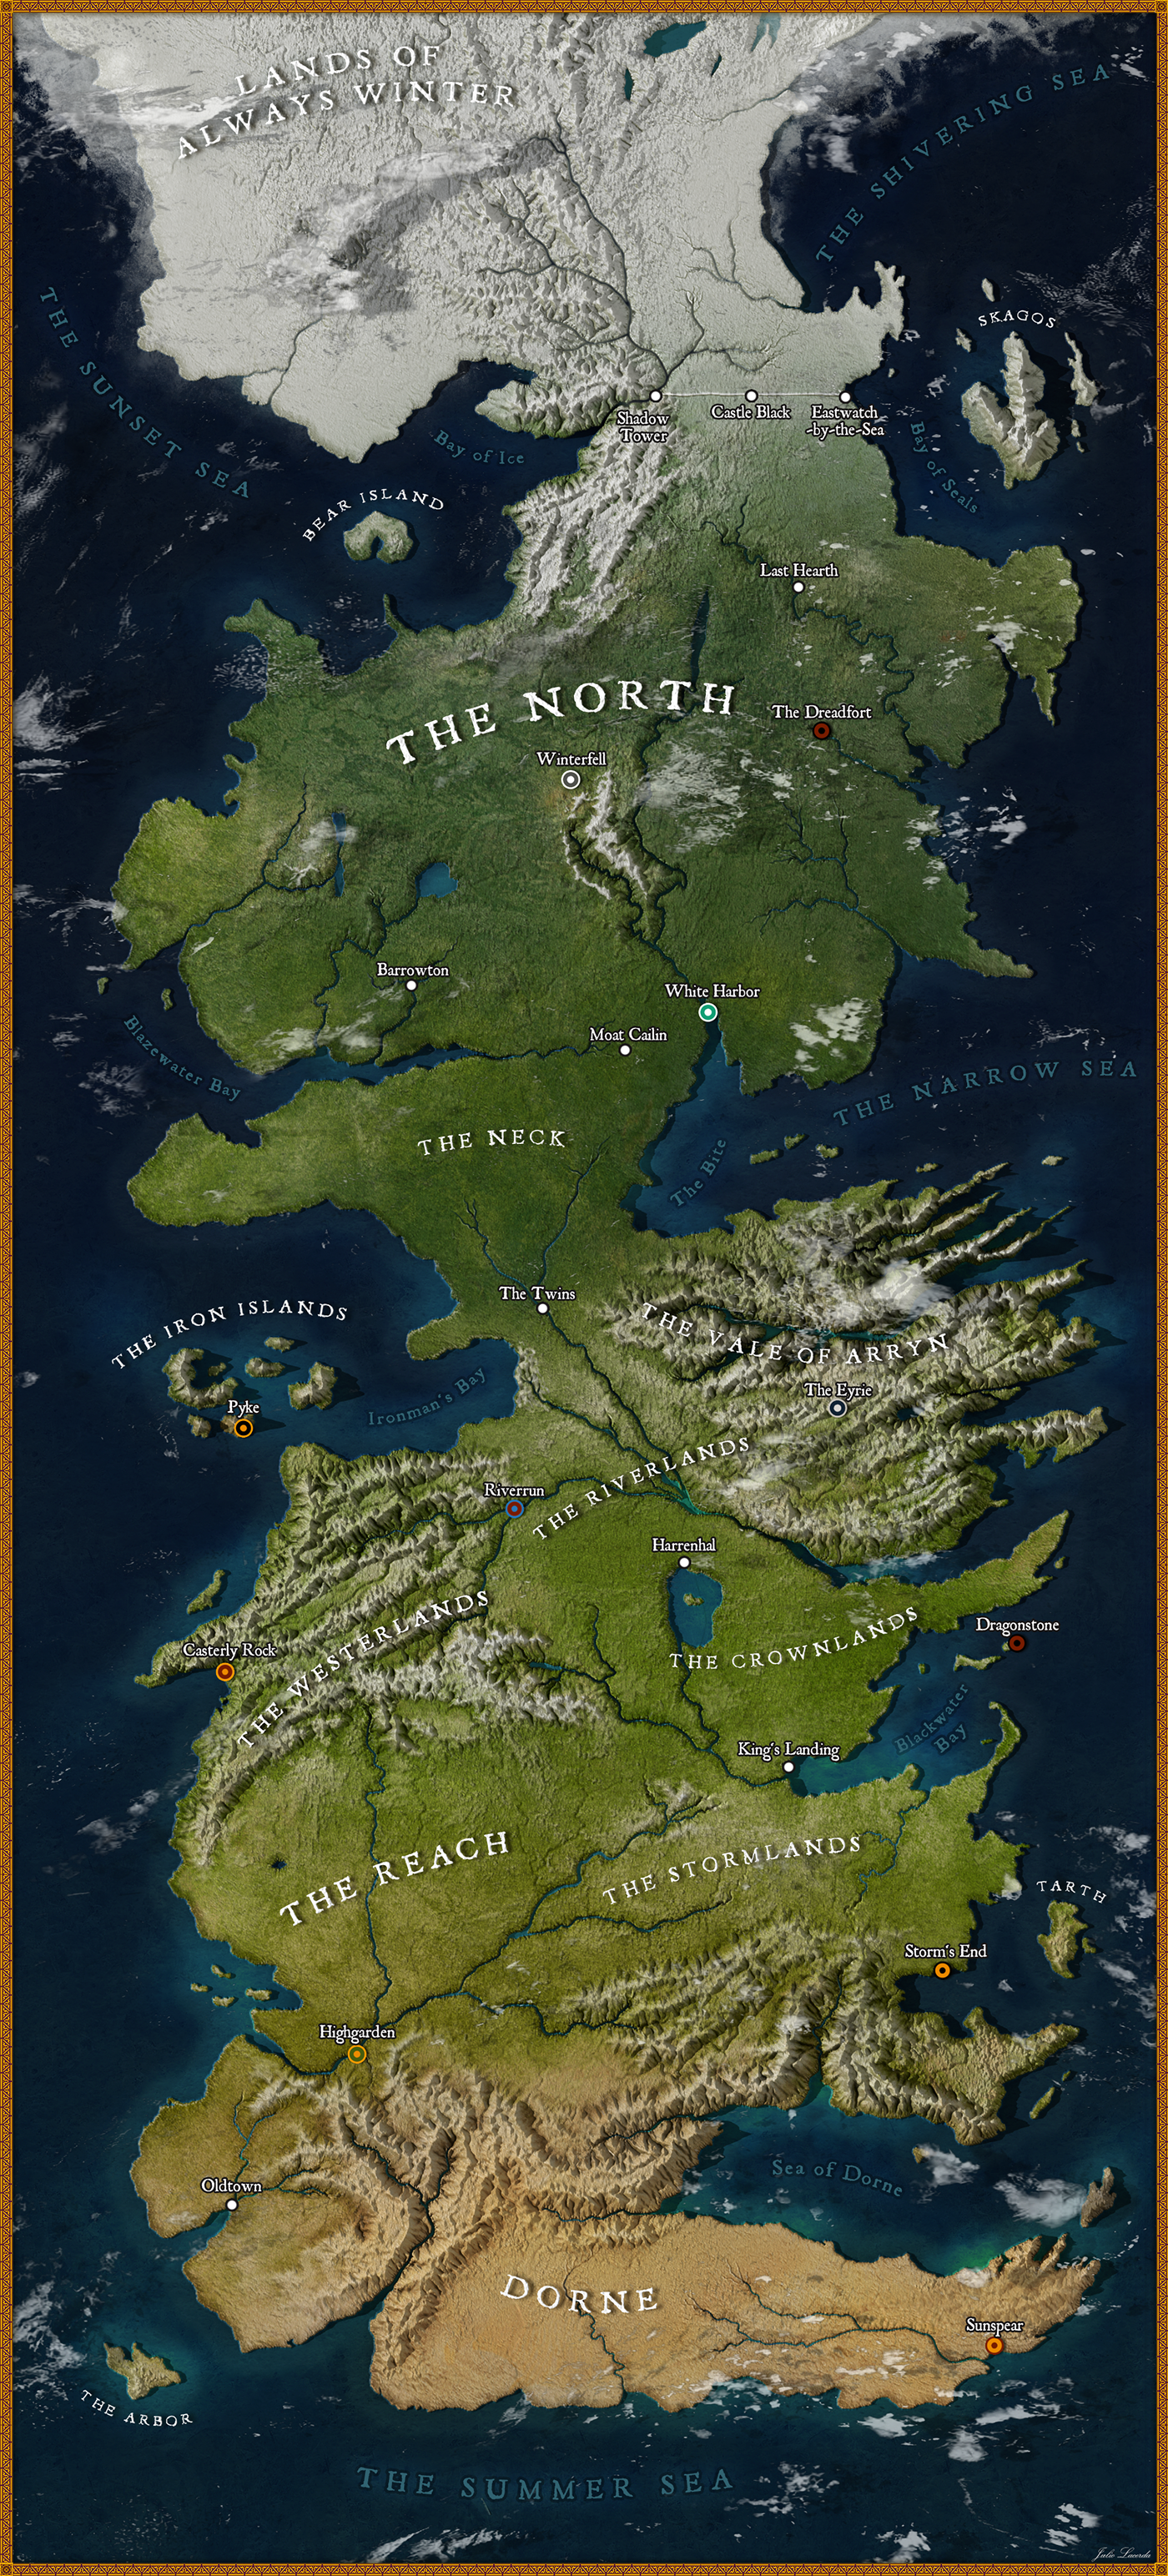 fantasy Game of Thrones asoiaf got maps cartograph Geography